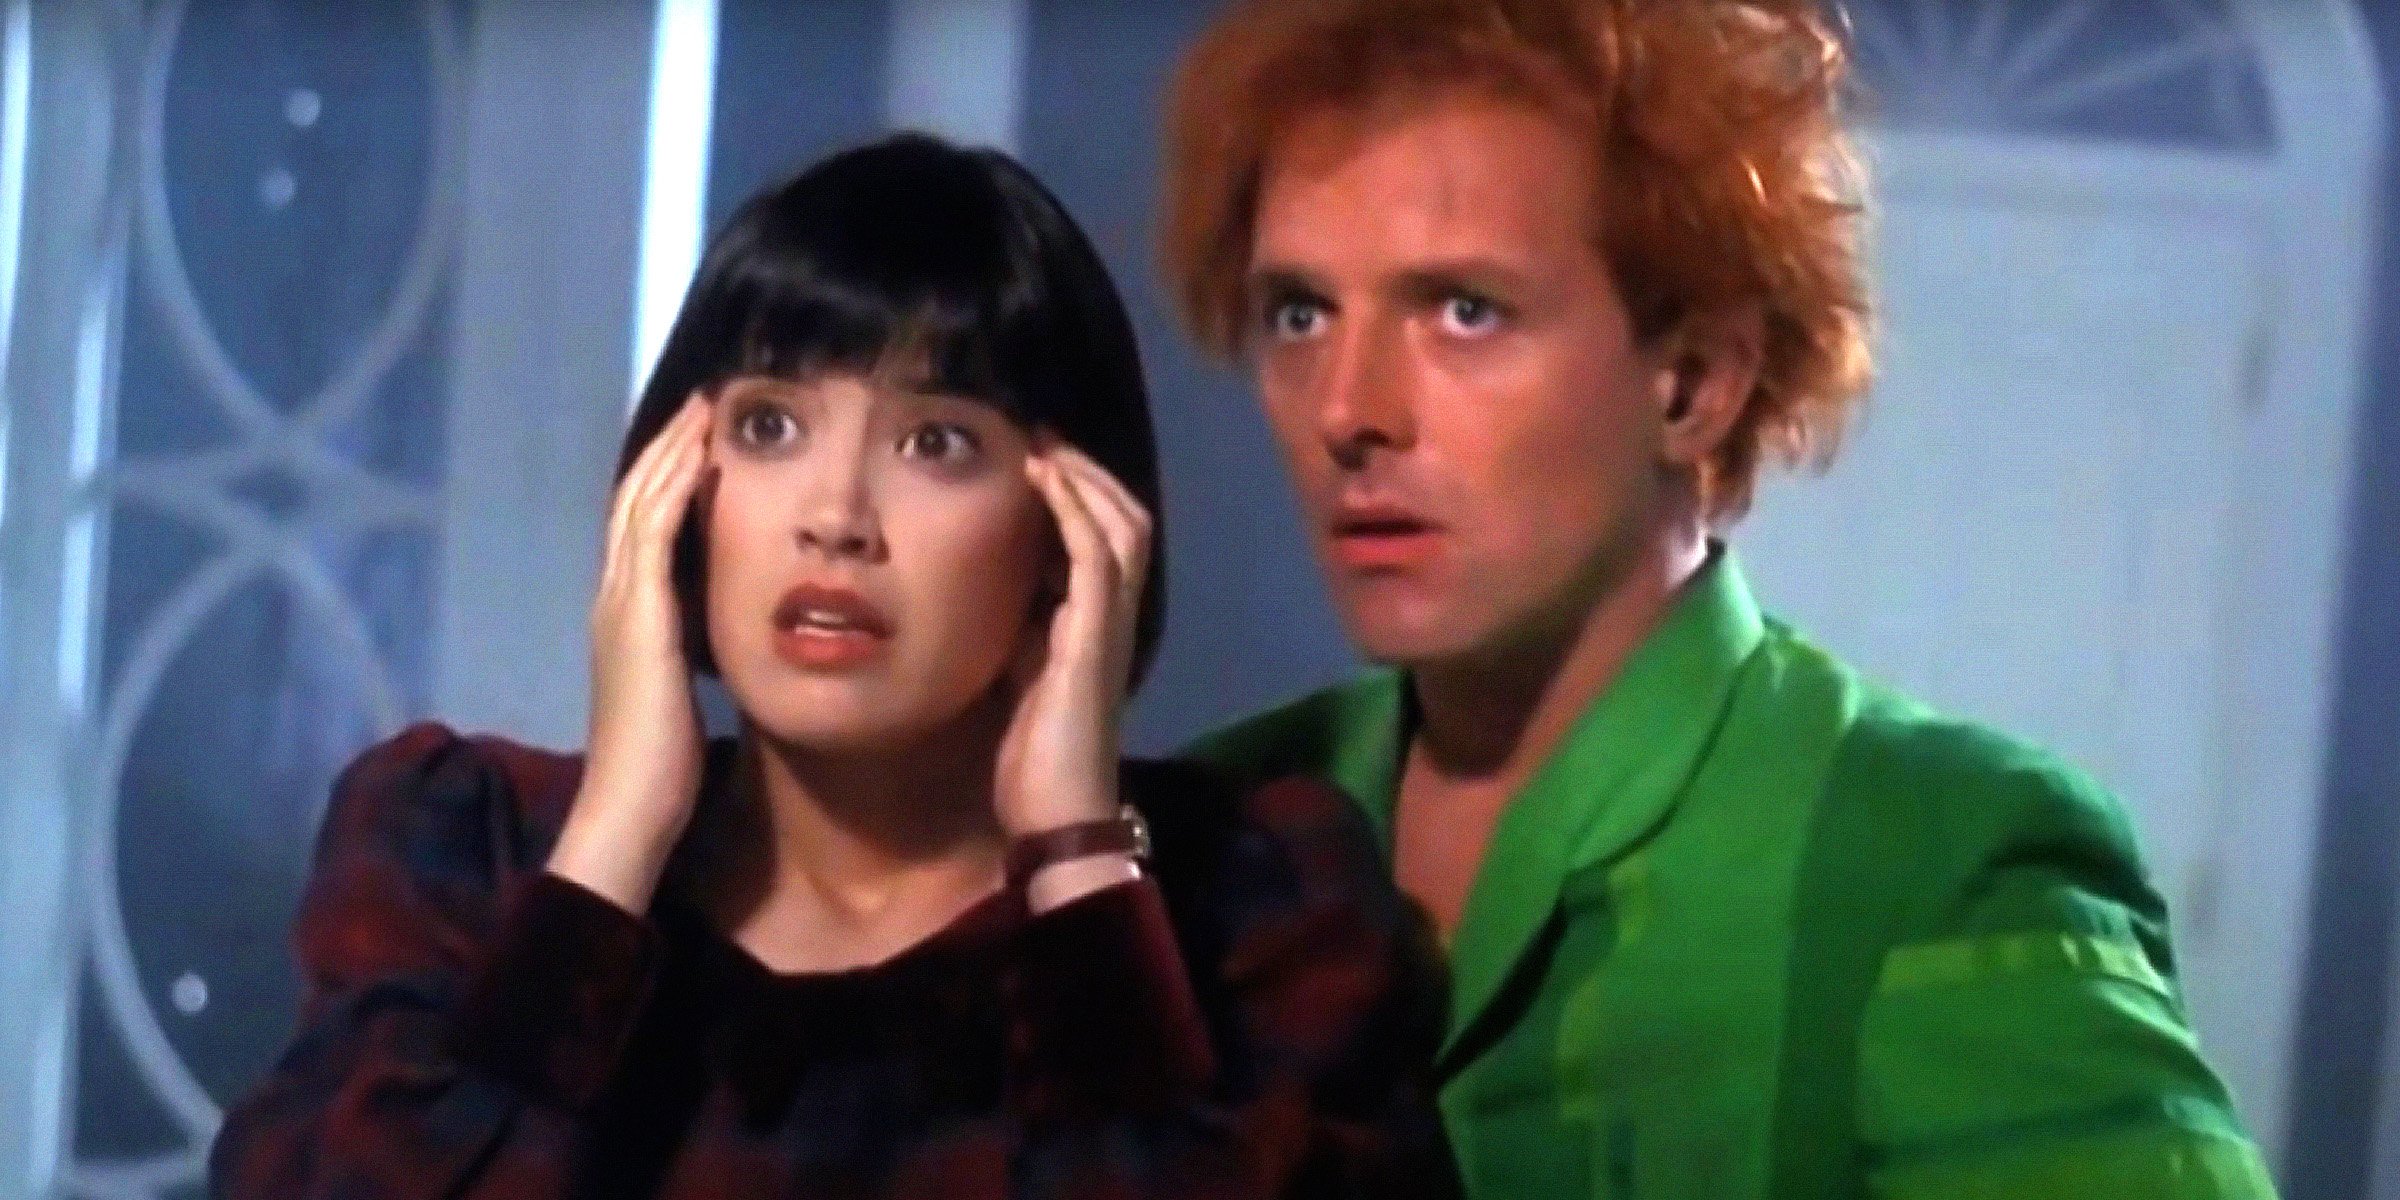  Elizabeth Cronin and Drop Dead Fred | Source:  youtube.com/wbpictures